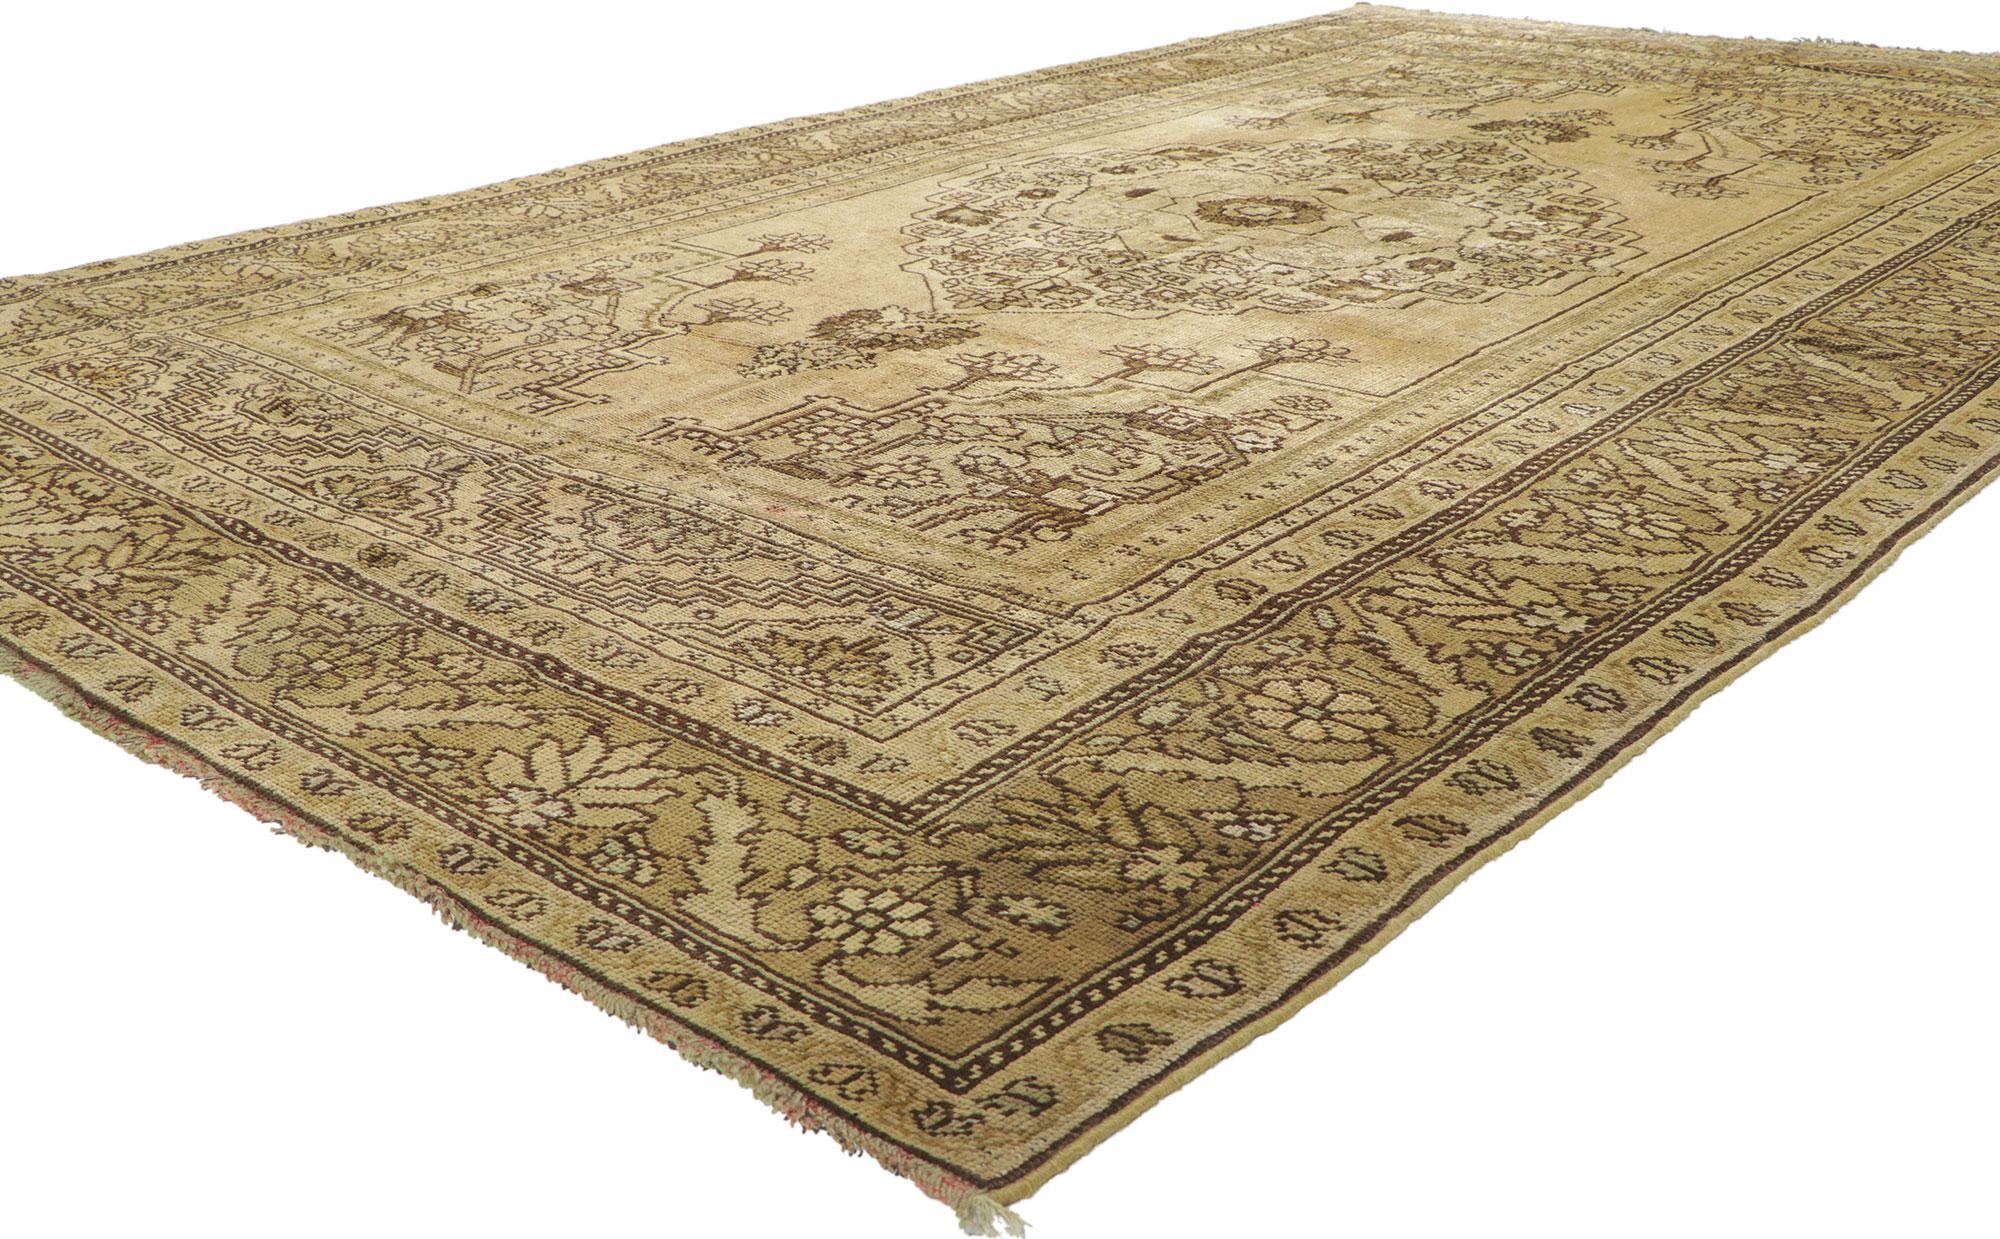 50517 Vintage Turkish Oushak Rug with Warm, Feminine Rustic Style, Hallway Runner 06'02 X 10'07. Unpretentious and simple meets warm, feminine rustic style. This hand-knotted wool vintage Turkish Oushak rug features a large-scale cusped medallion